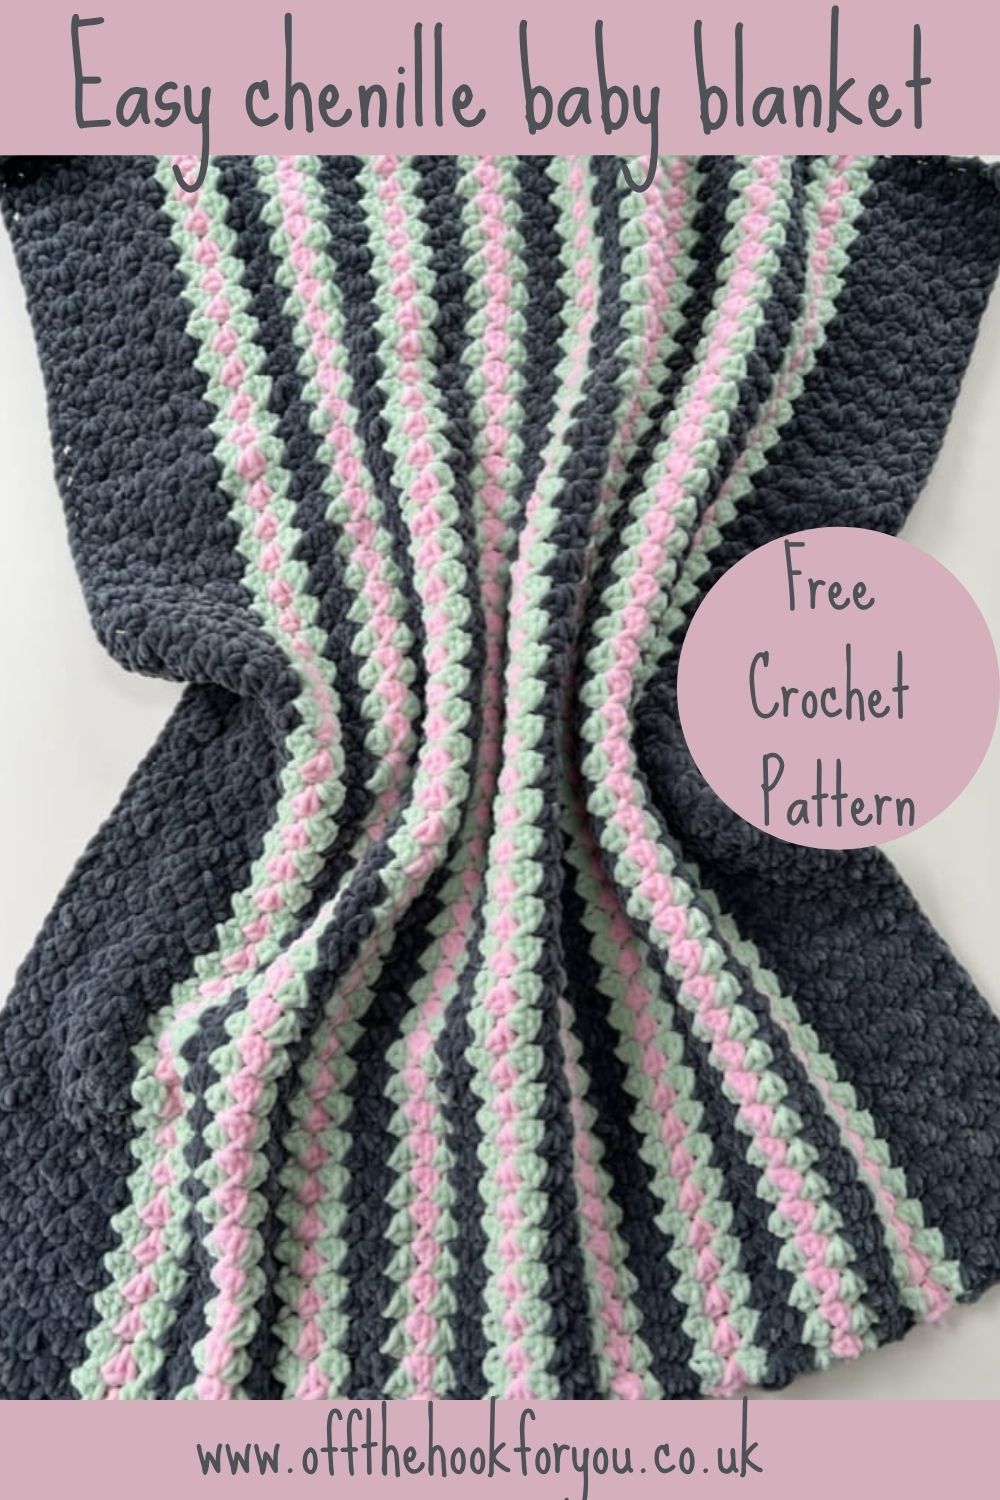 Easy Chenille Baby Blanket - off the hook for you